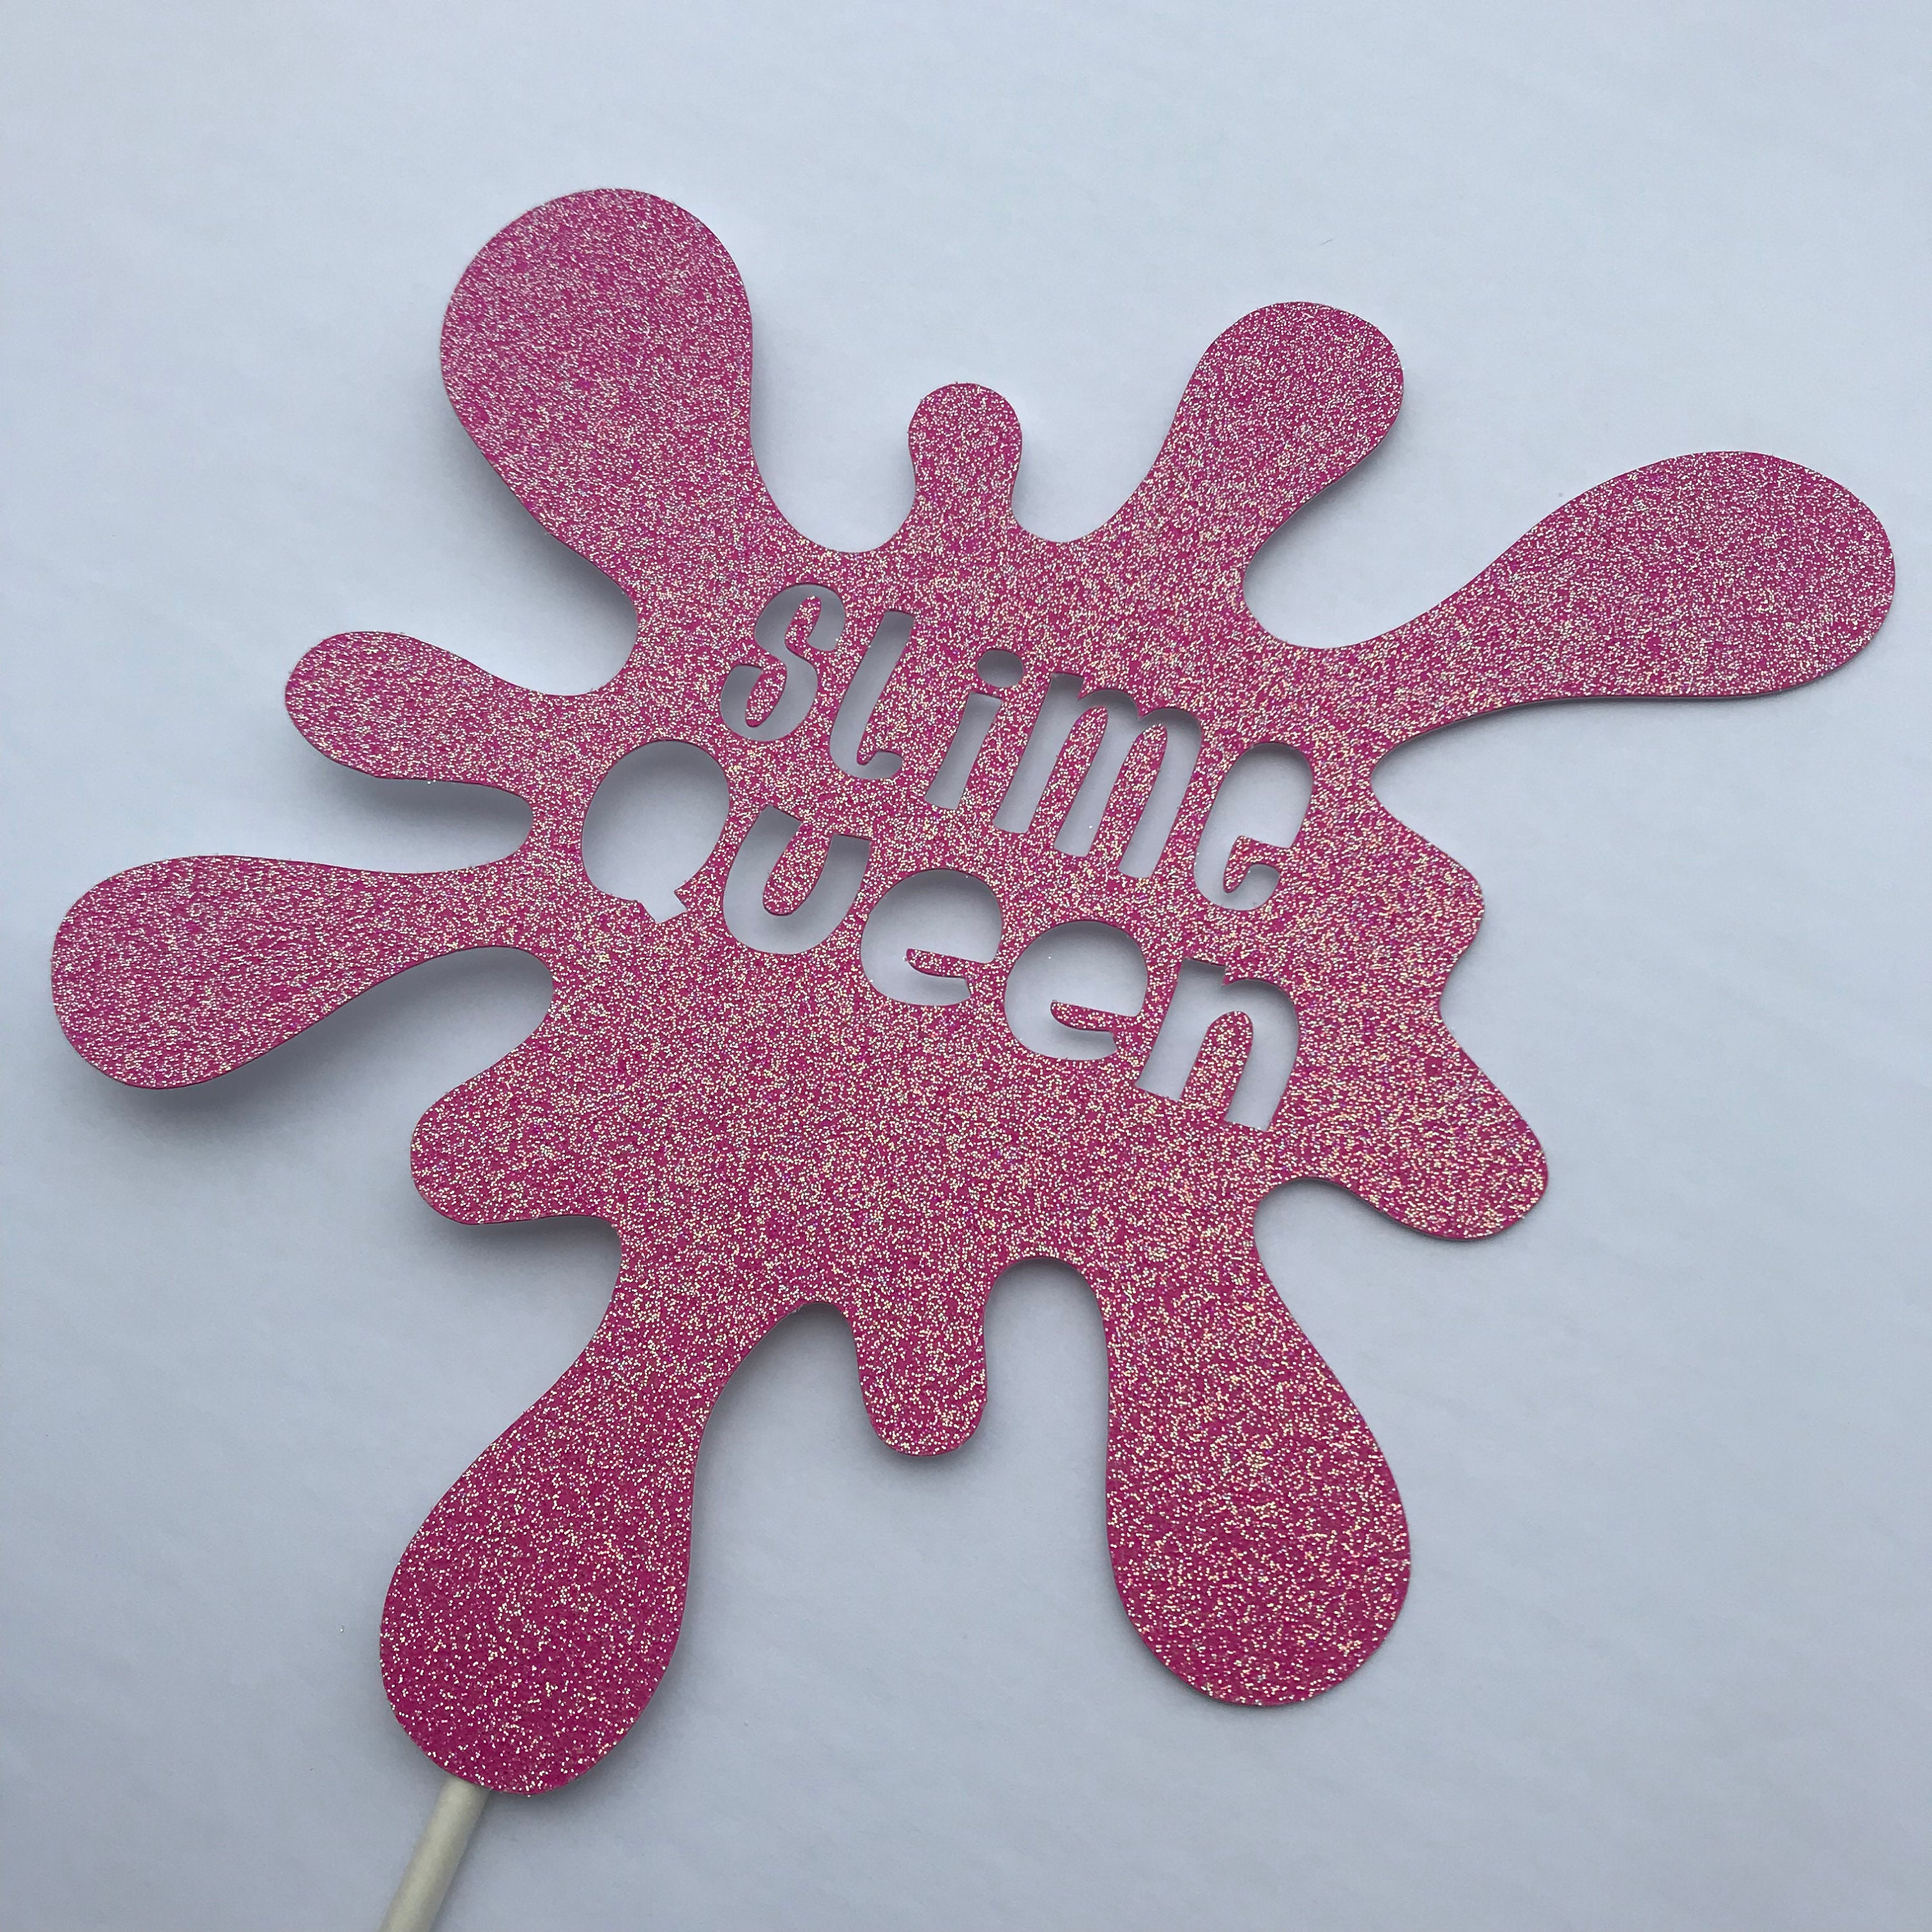 Slime Happy Birthday Cake Topper - Slime Queen Birthday Cake Topper 6pcs  Slime Cupcake Toppers - Girl's Birthday Party Decorations